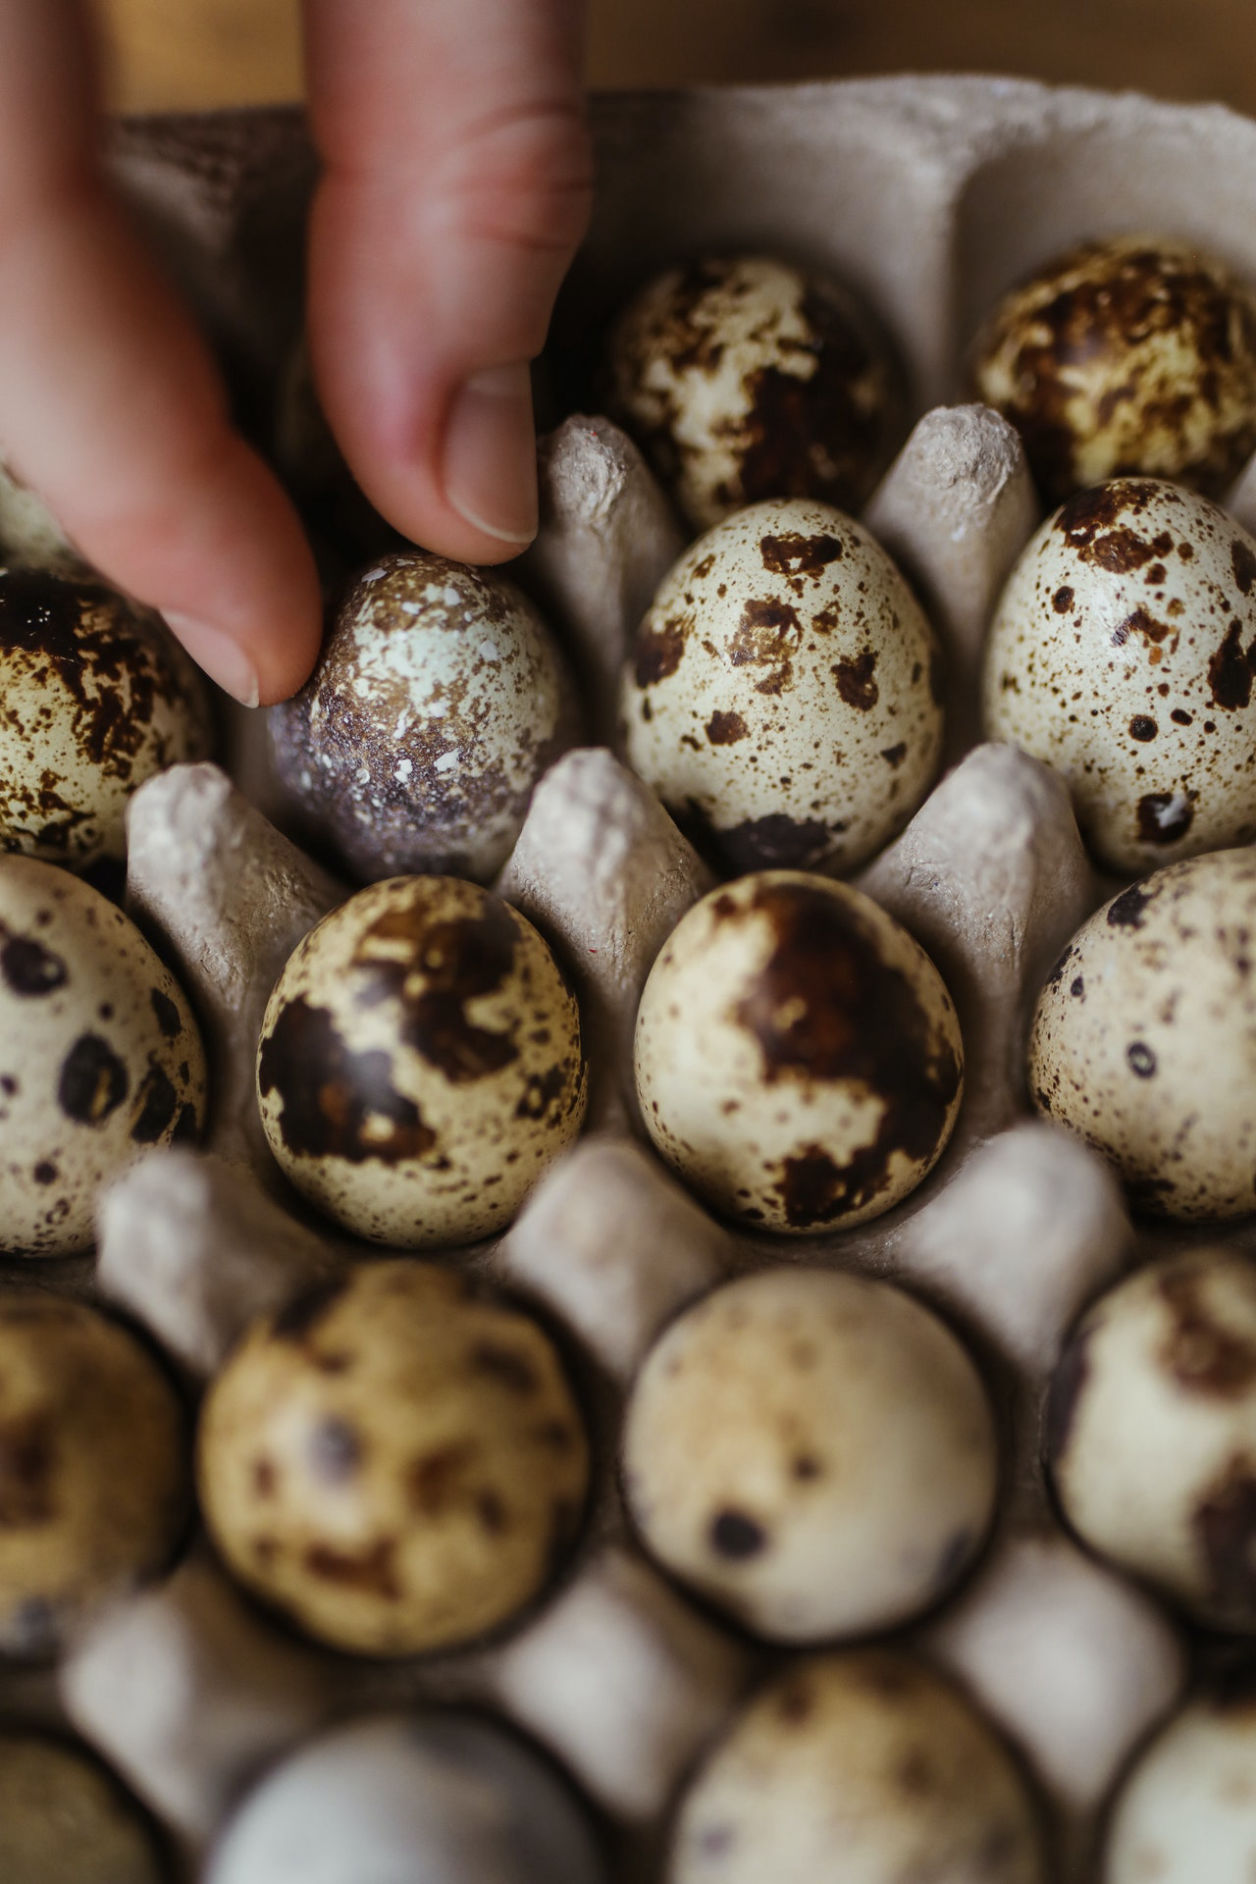 Image of quail eggs in basket